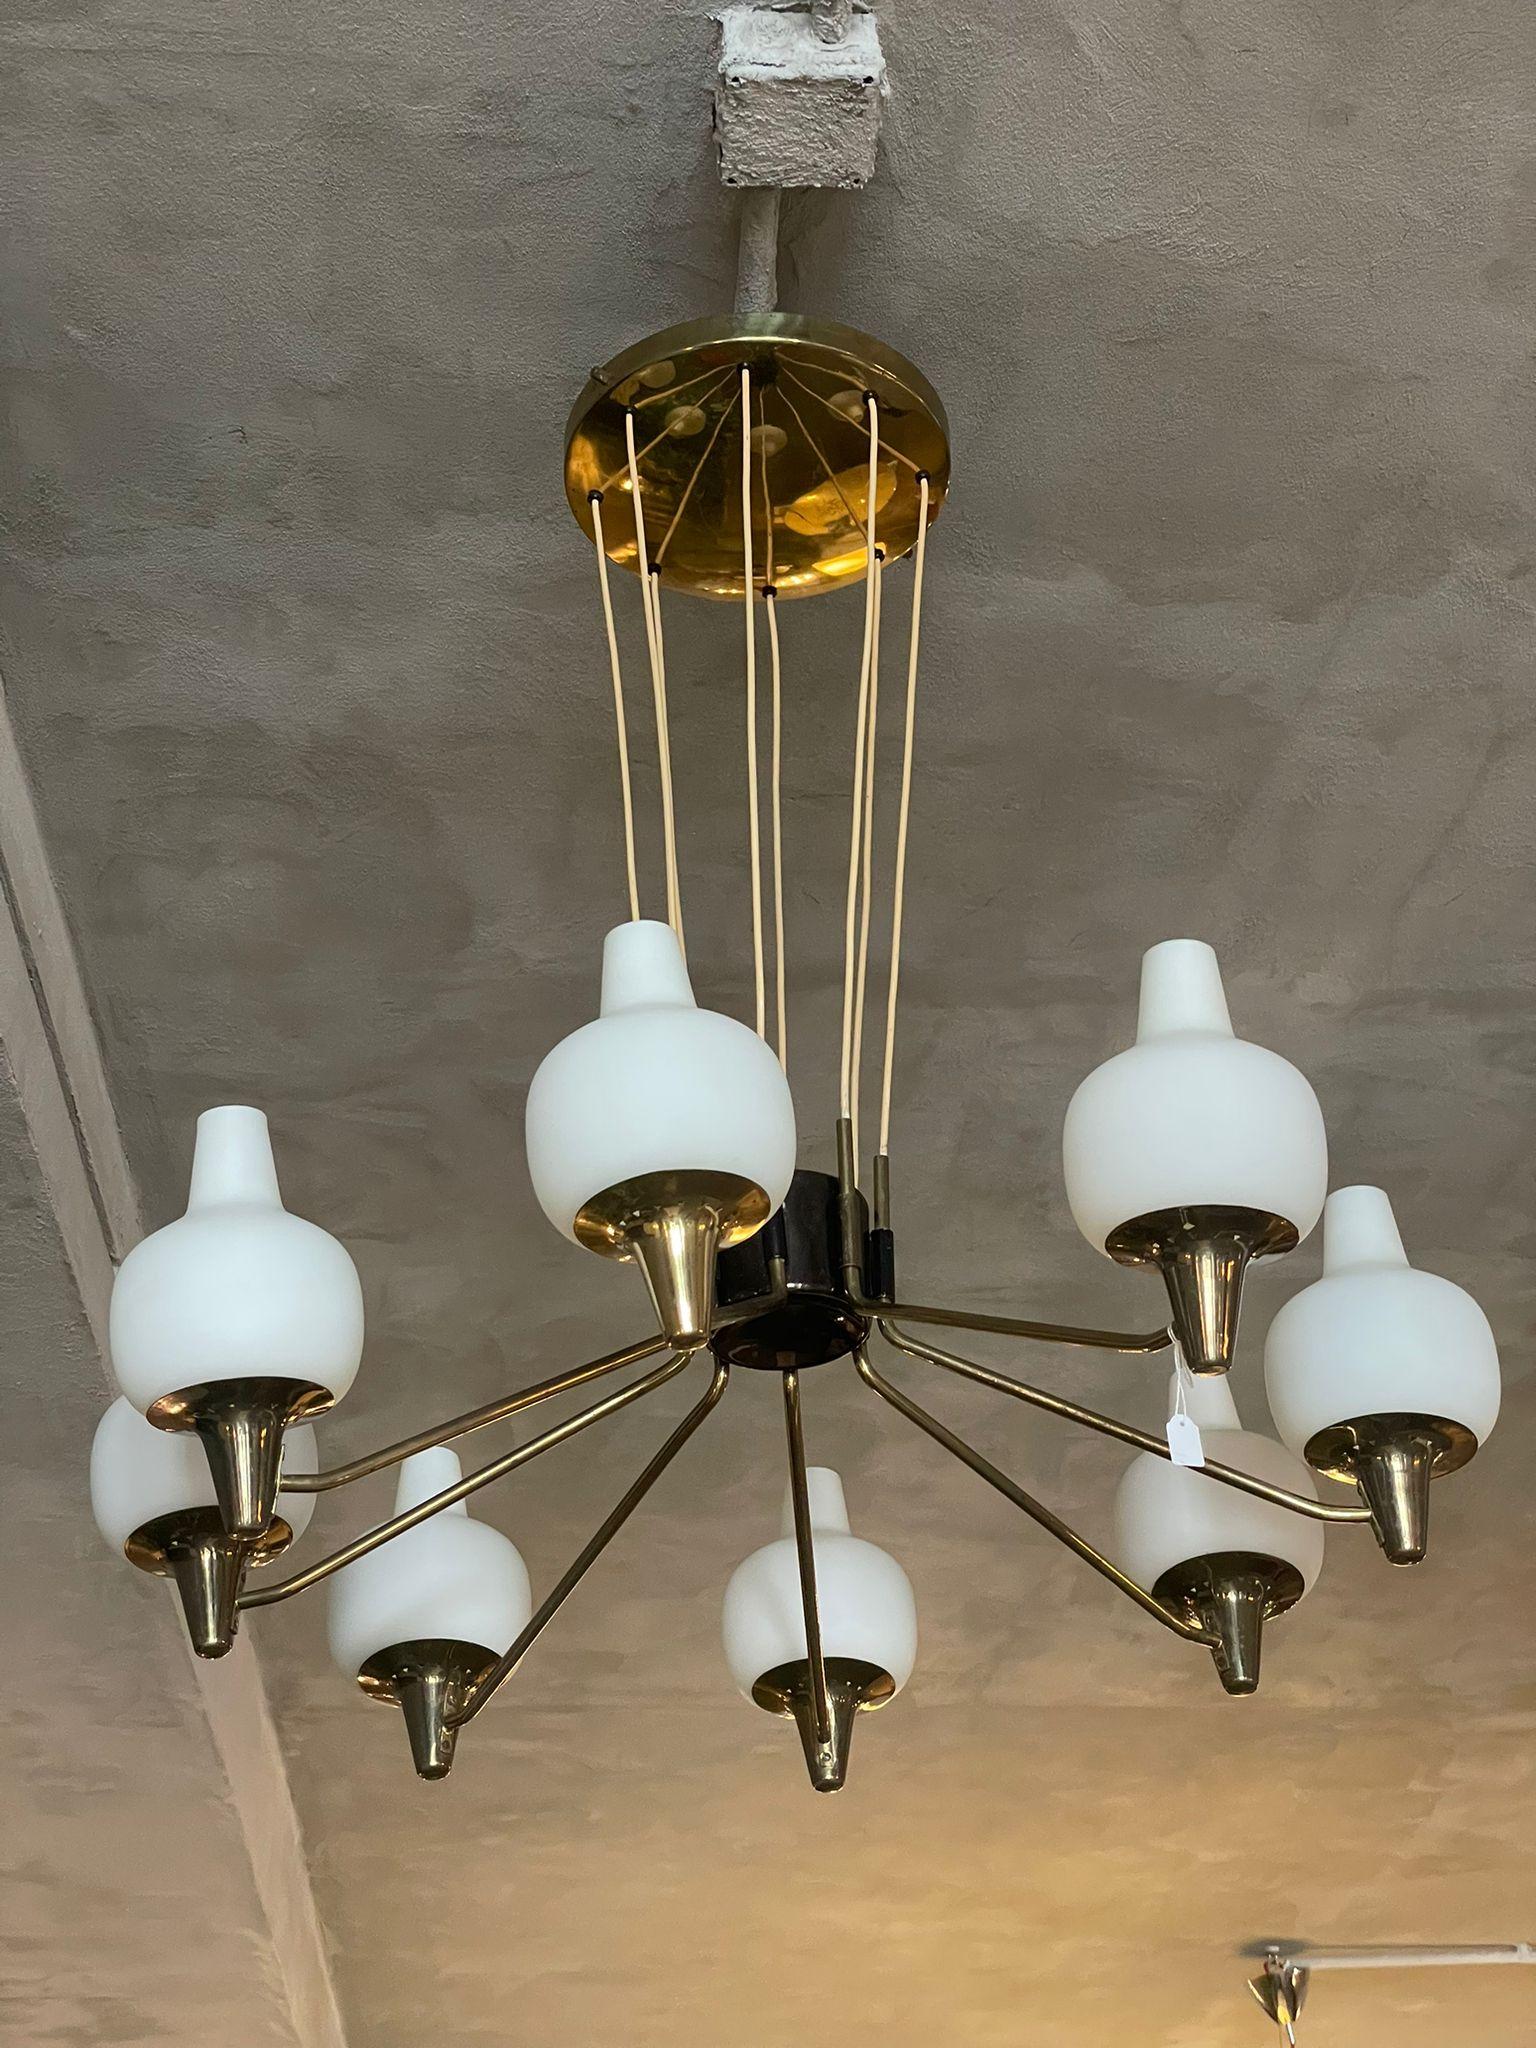 Brass chandelier manufactured by Stilnovo, in Italy, 1950s.
The chandelier on the ceiling has a circular brass plate from which are present eight cables that converge in the black structure from which the eight arms branch off.
Each of eight arms